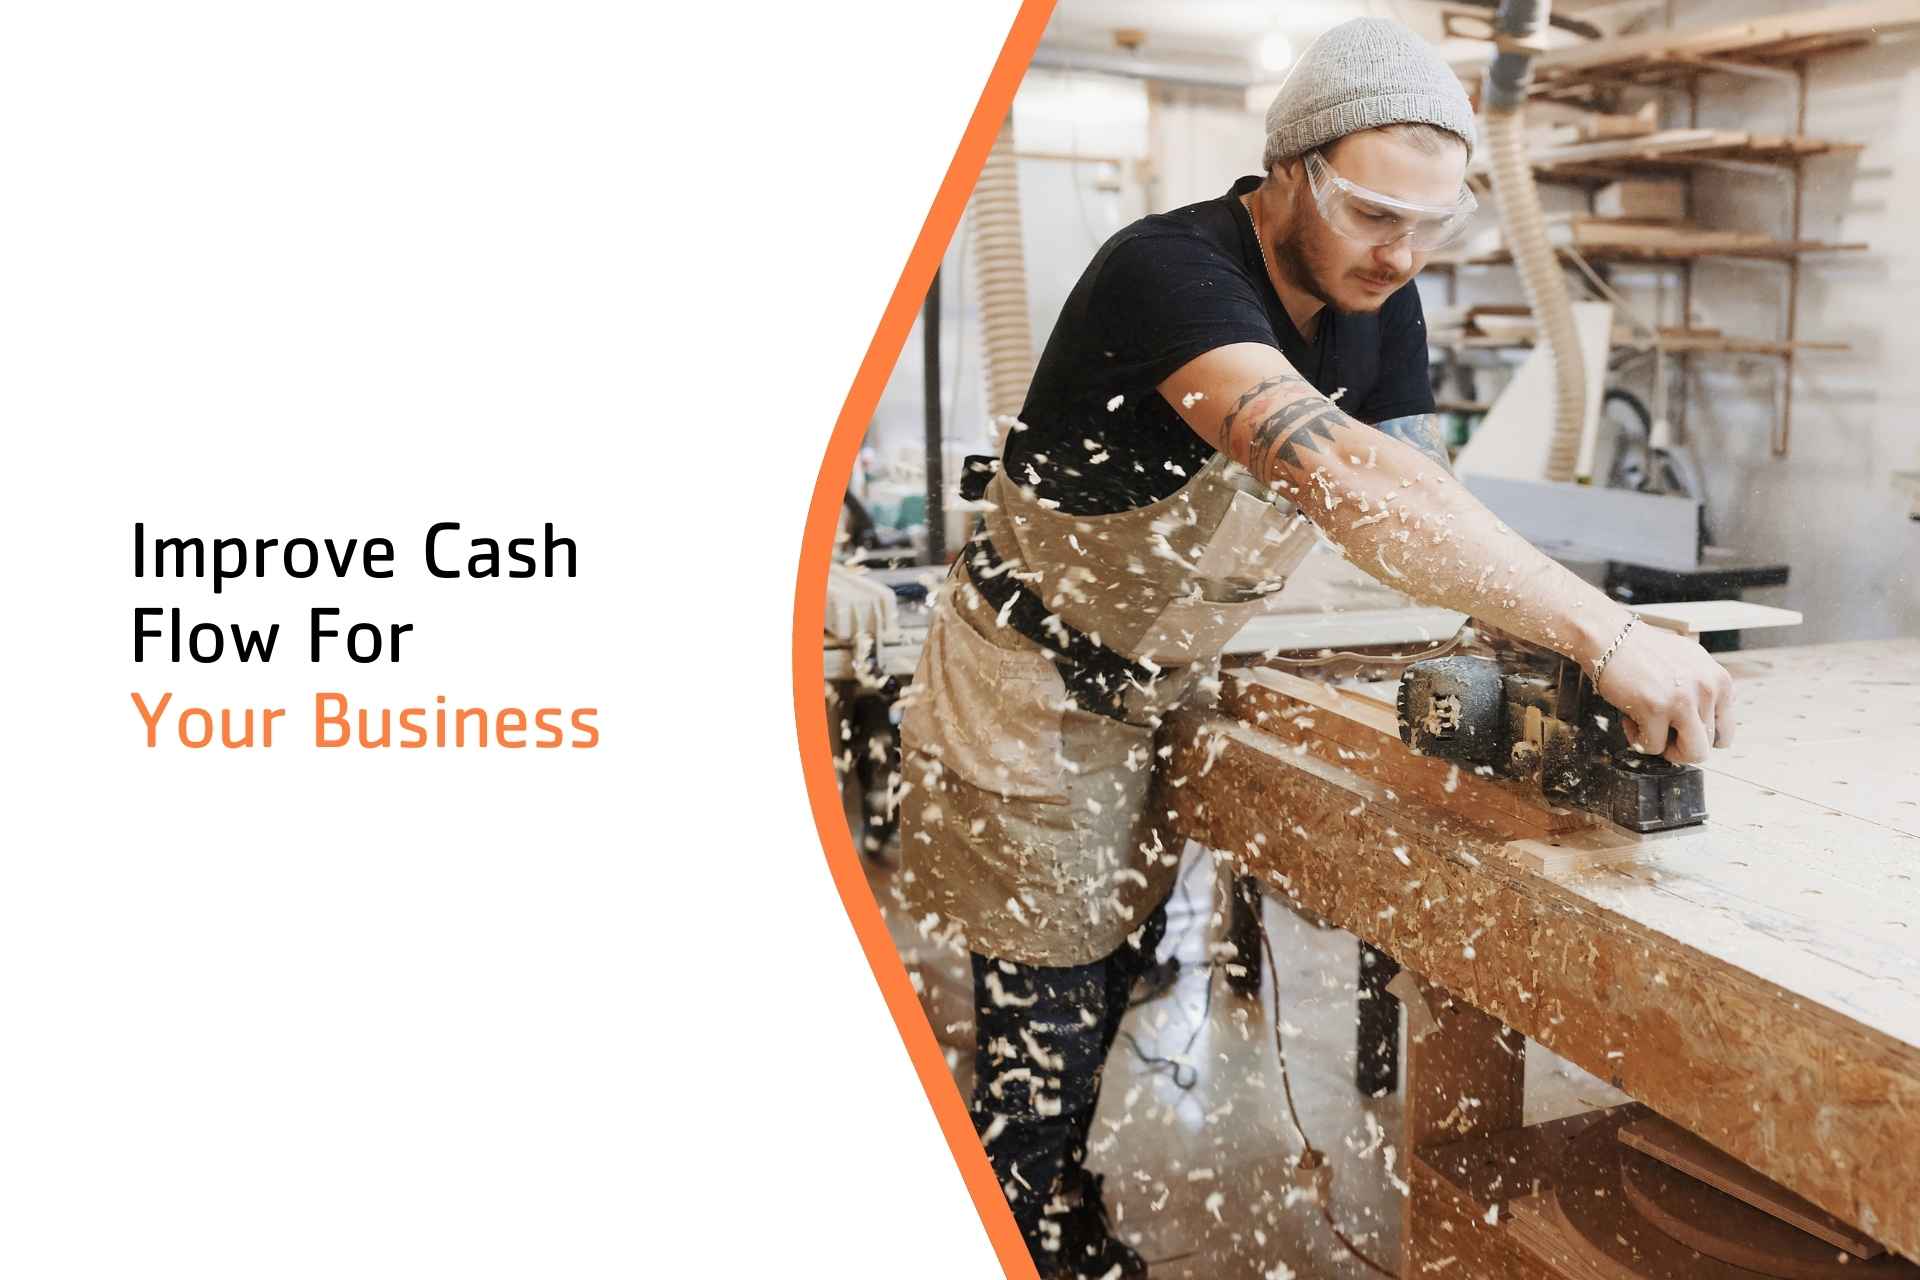 8 Ways to Improve Cash Flow for Your Business